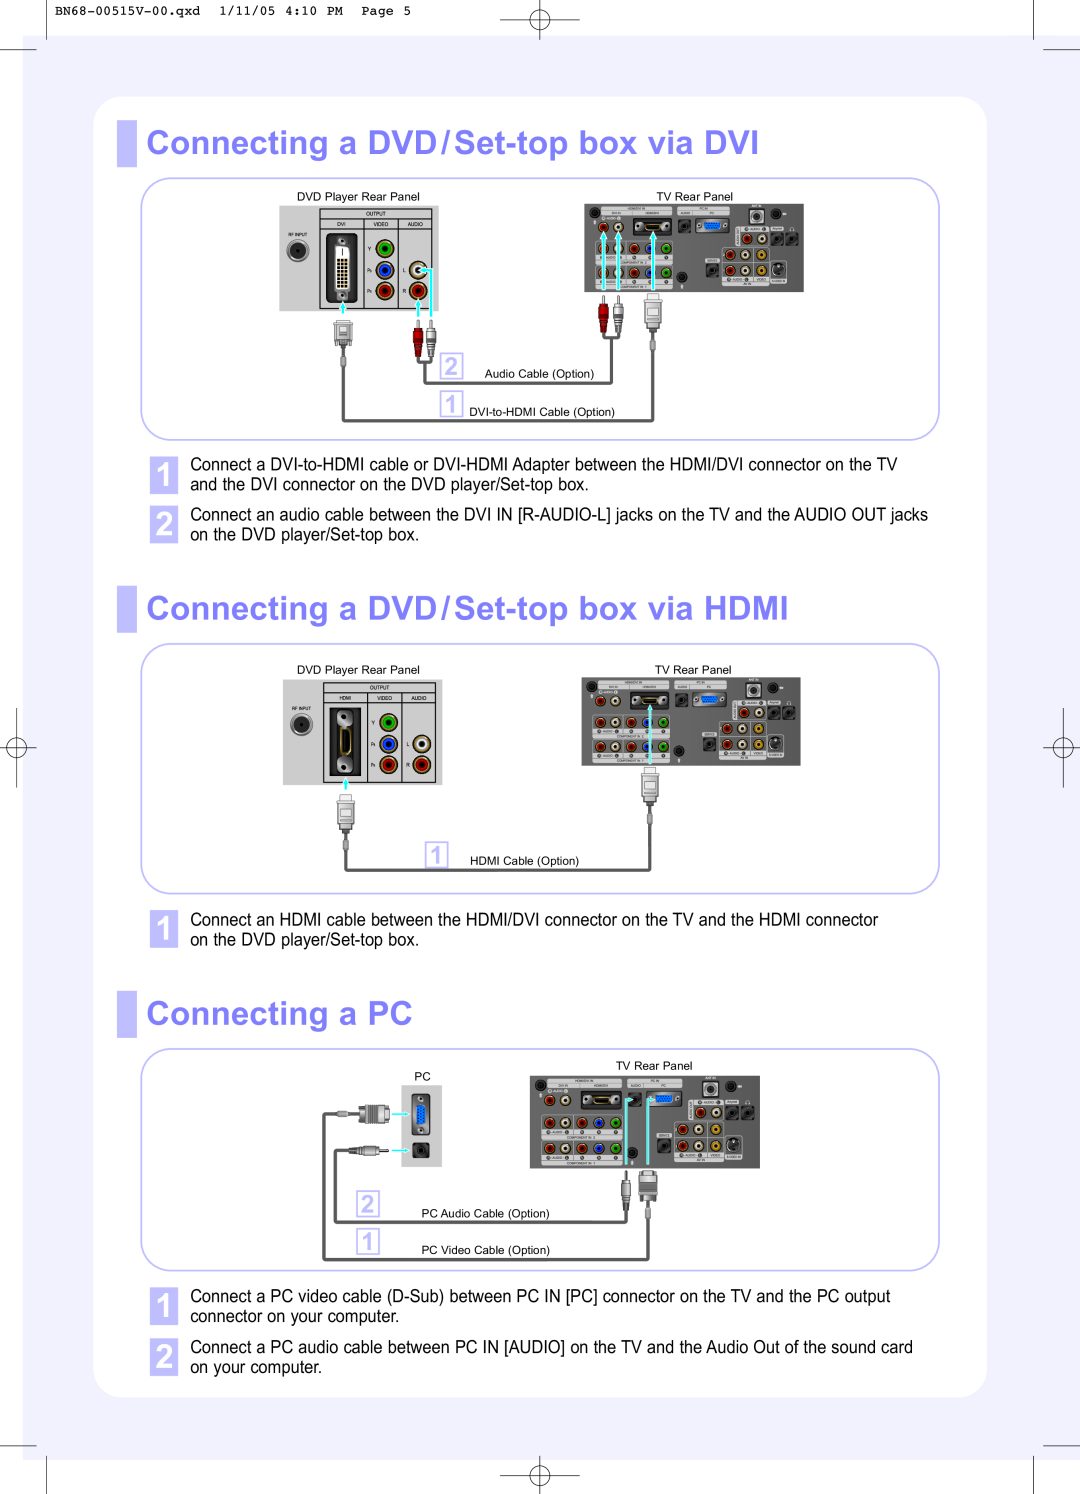 Samsung LN-R238W, LN-R328W Connecting a DVD/Set-top box via DVI, Connecting a DVD/Set-top box via HDMI, Connecting a PC 